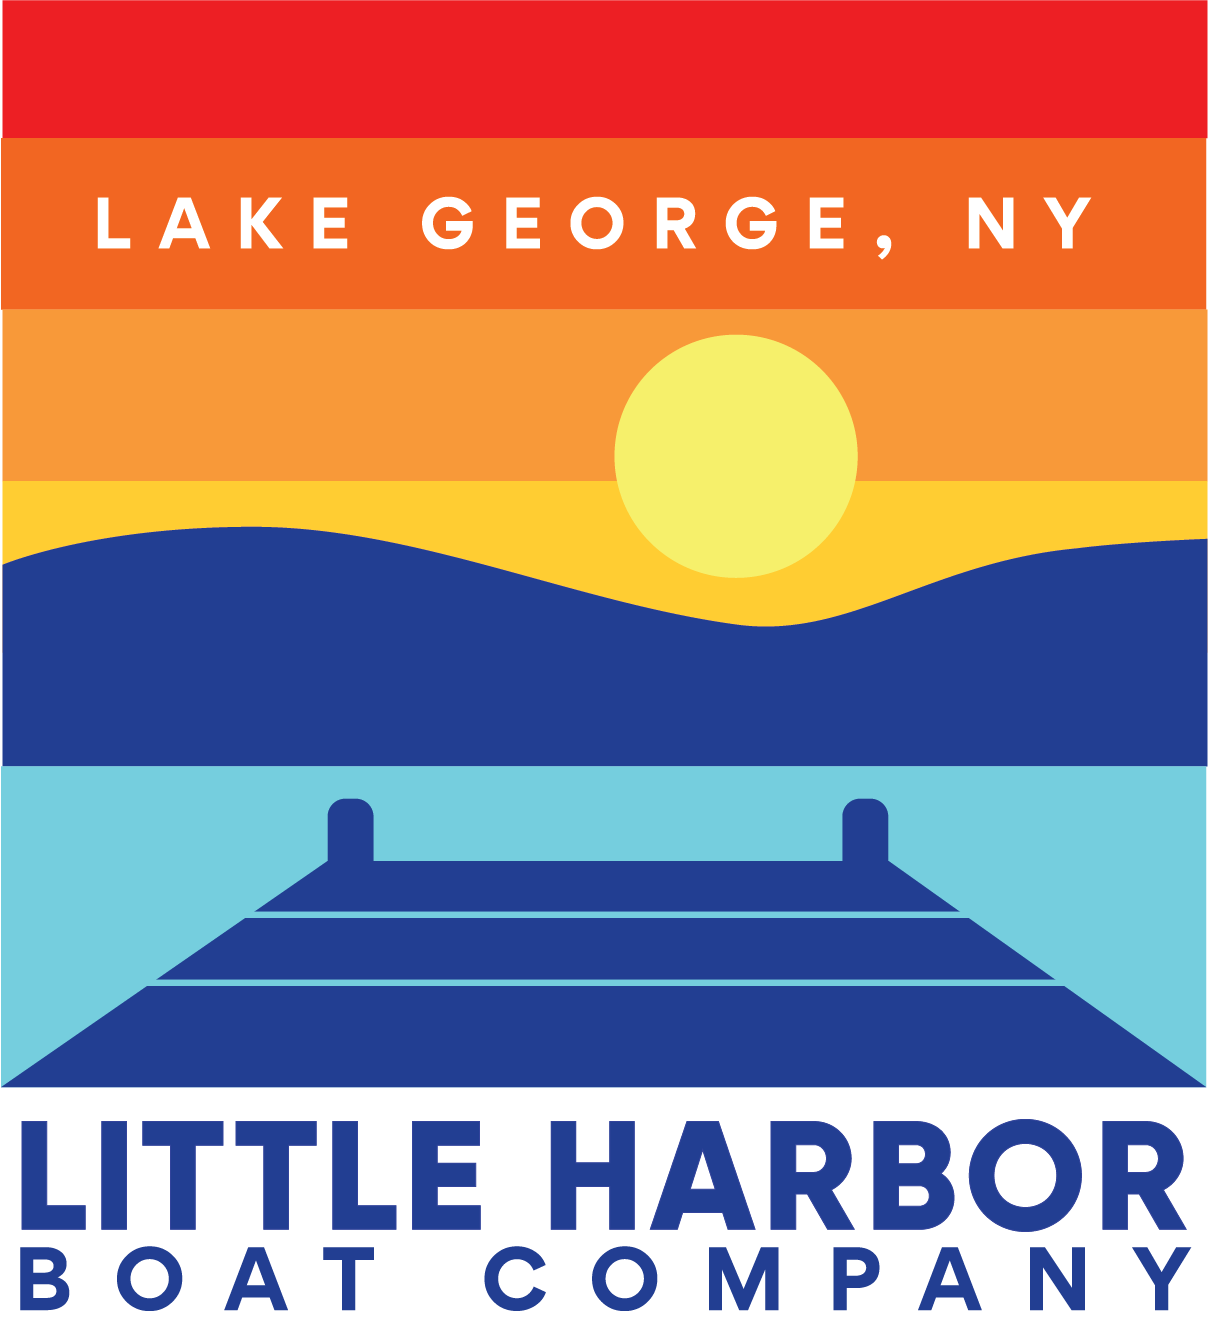 a logo for the little harbor boat company in lake george ny